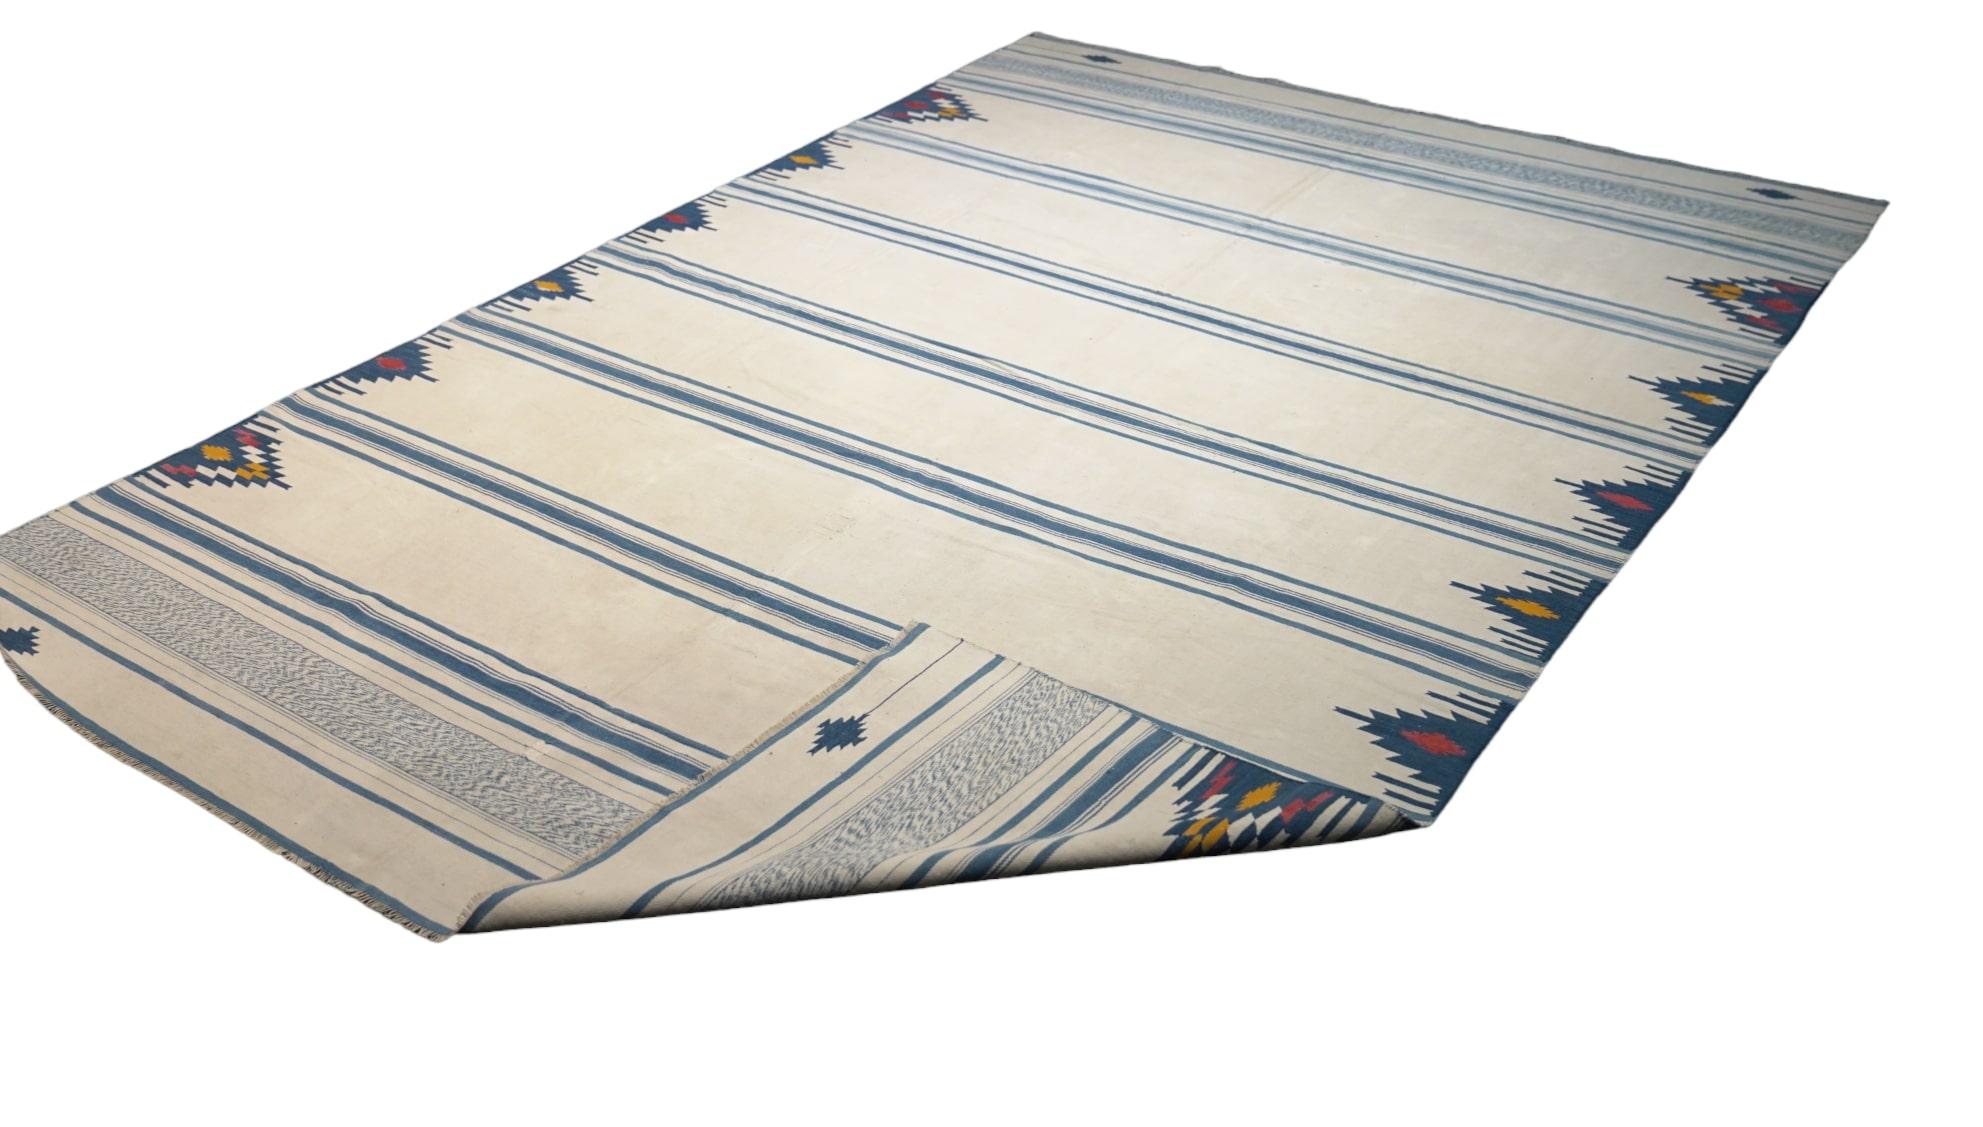 Hand-Woven Vintage Dhurrie Rug in Blue and Beigewith Stripes, from Rug & Kilim For Sale